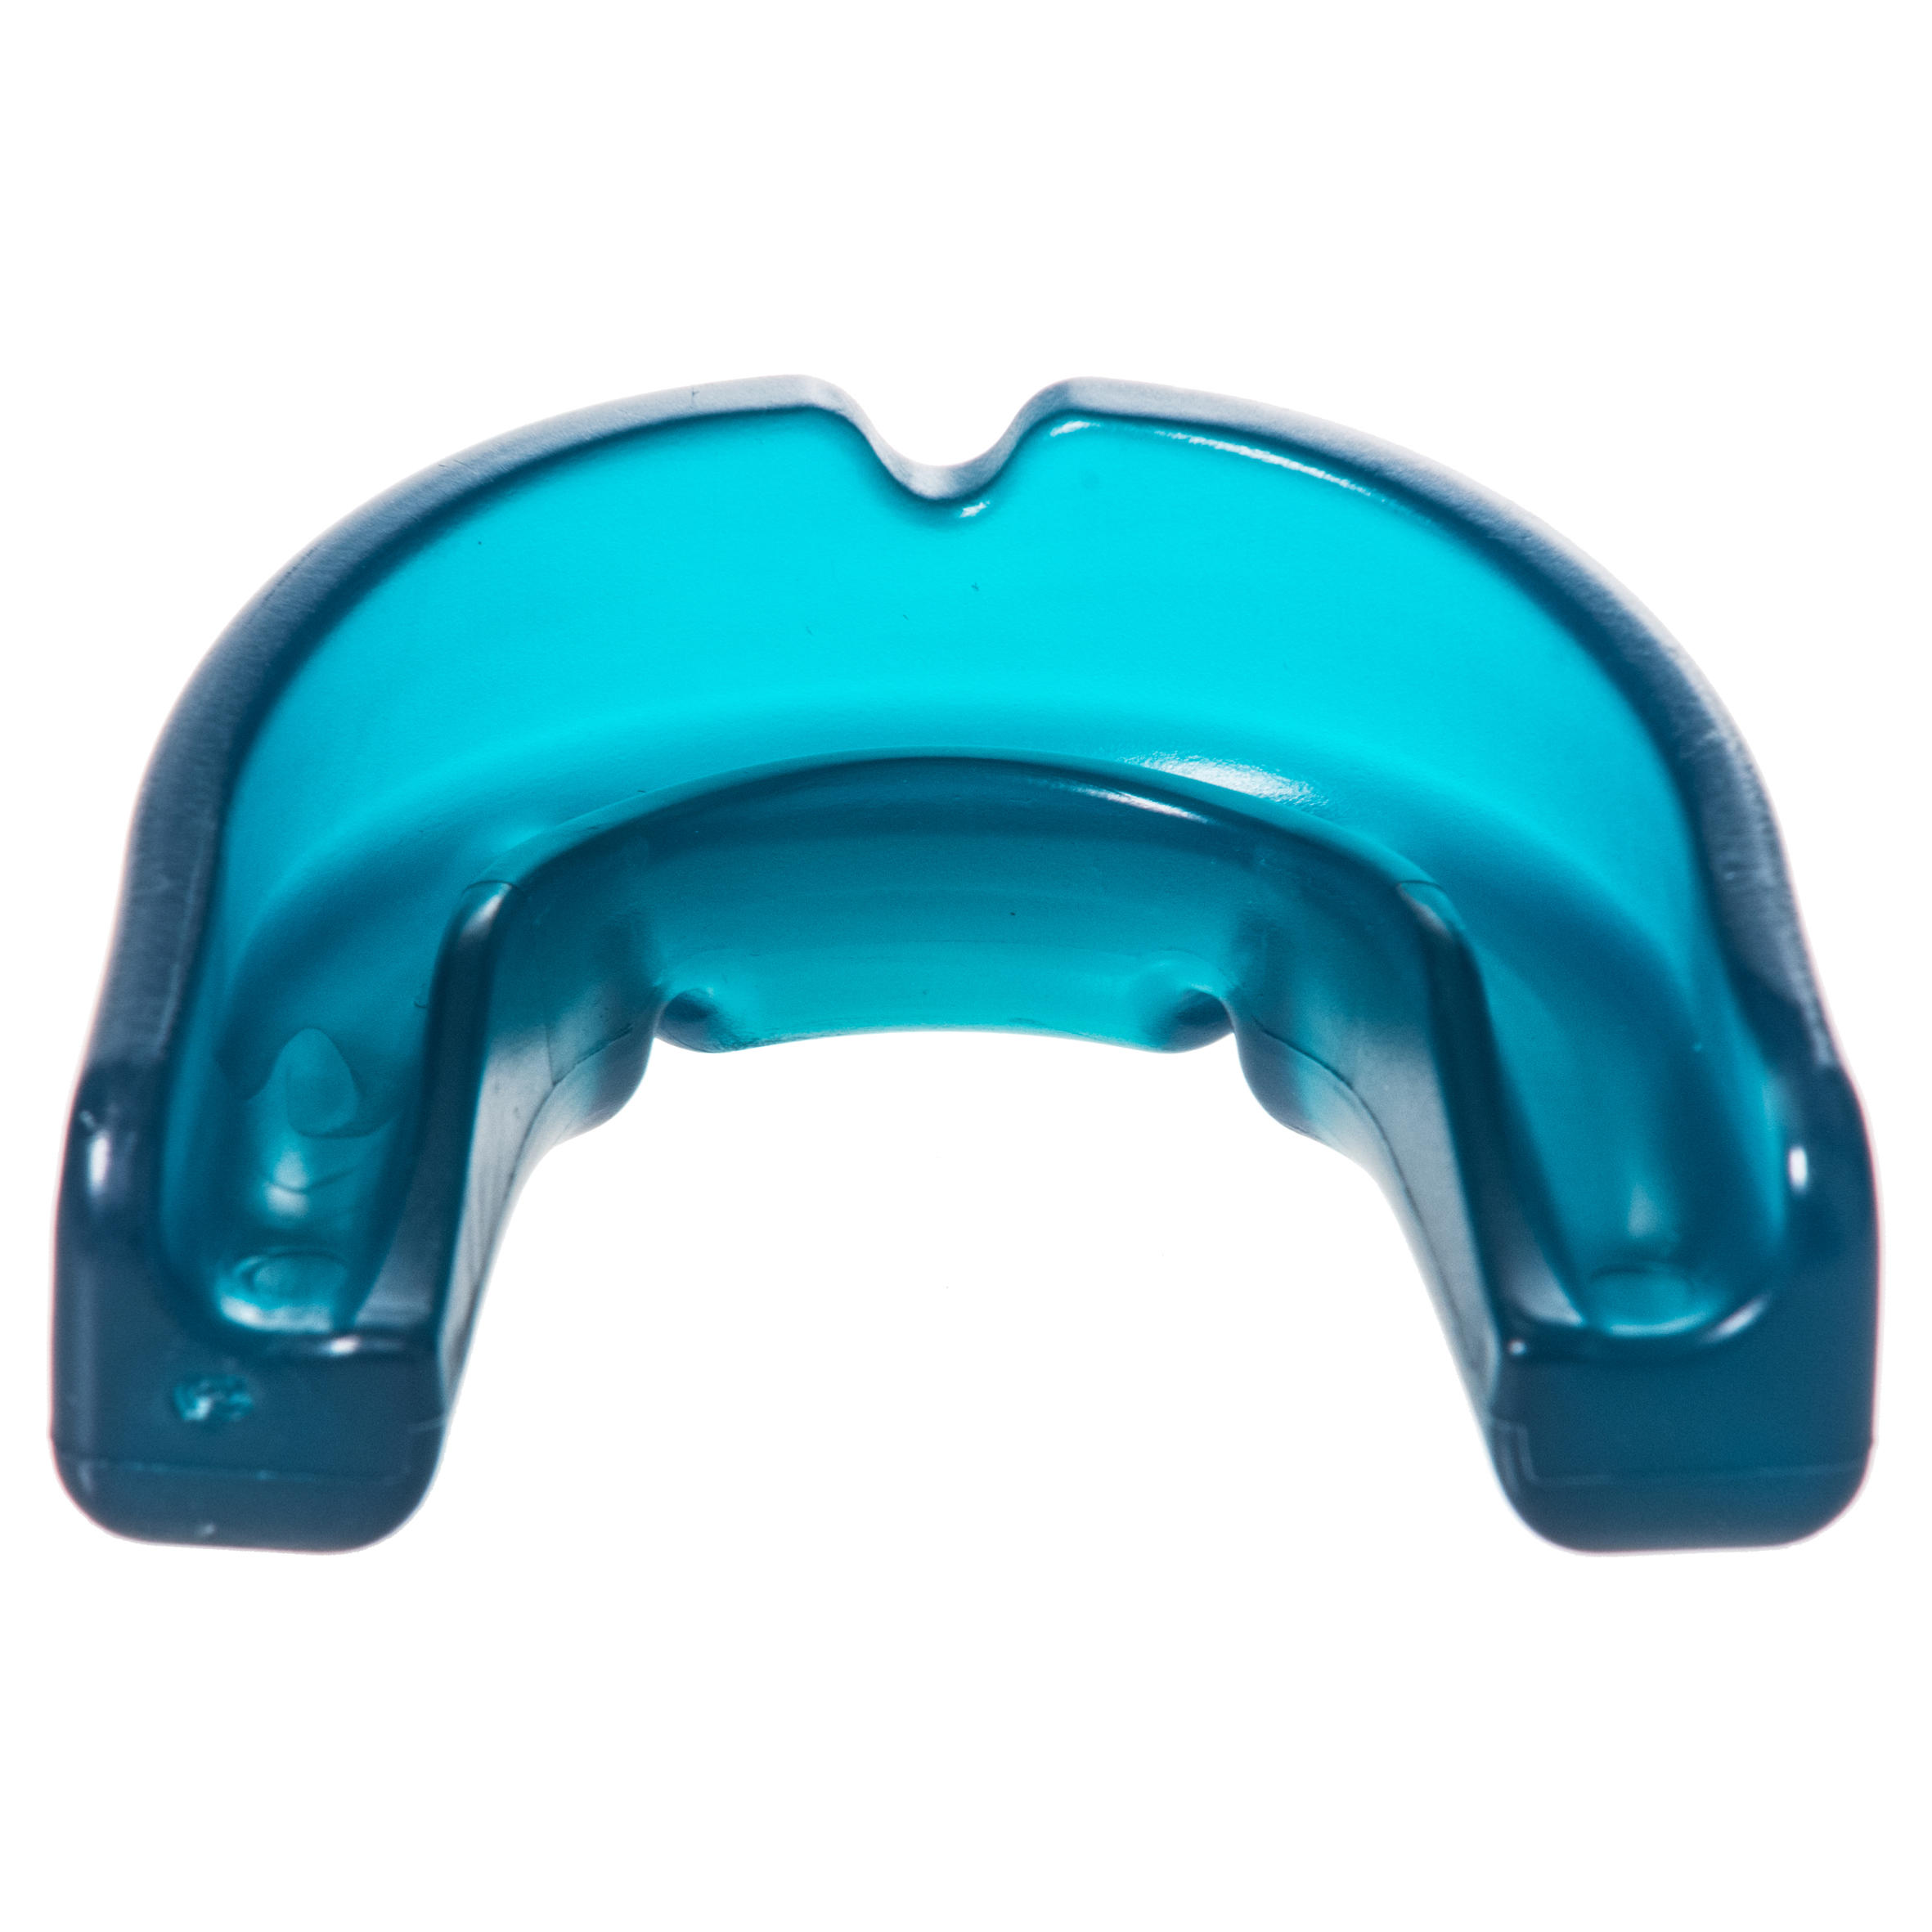 FH100 Adult Large Low-Intensity Field Hockey Mouthguard - Turquoise 2/9